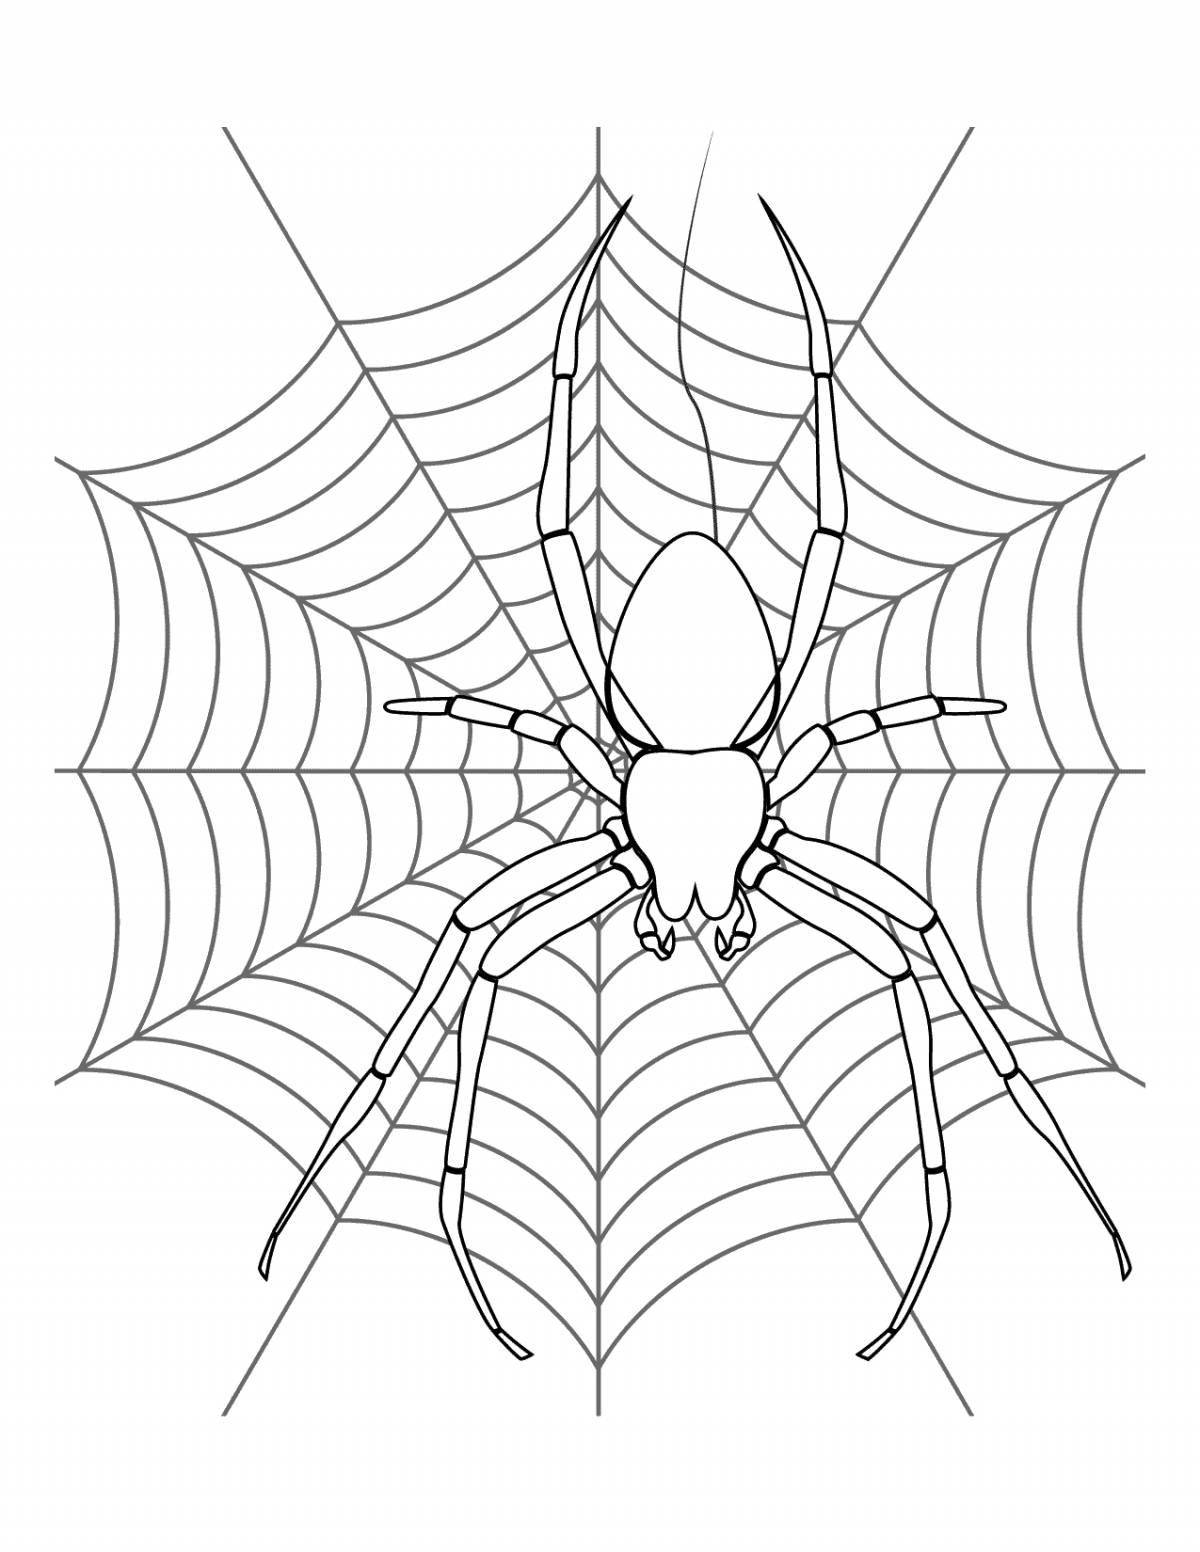 Shiny Web coloring book for kids